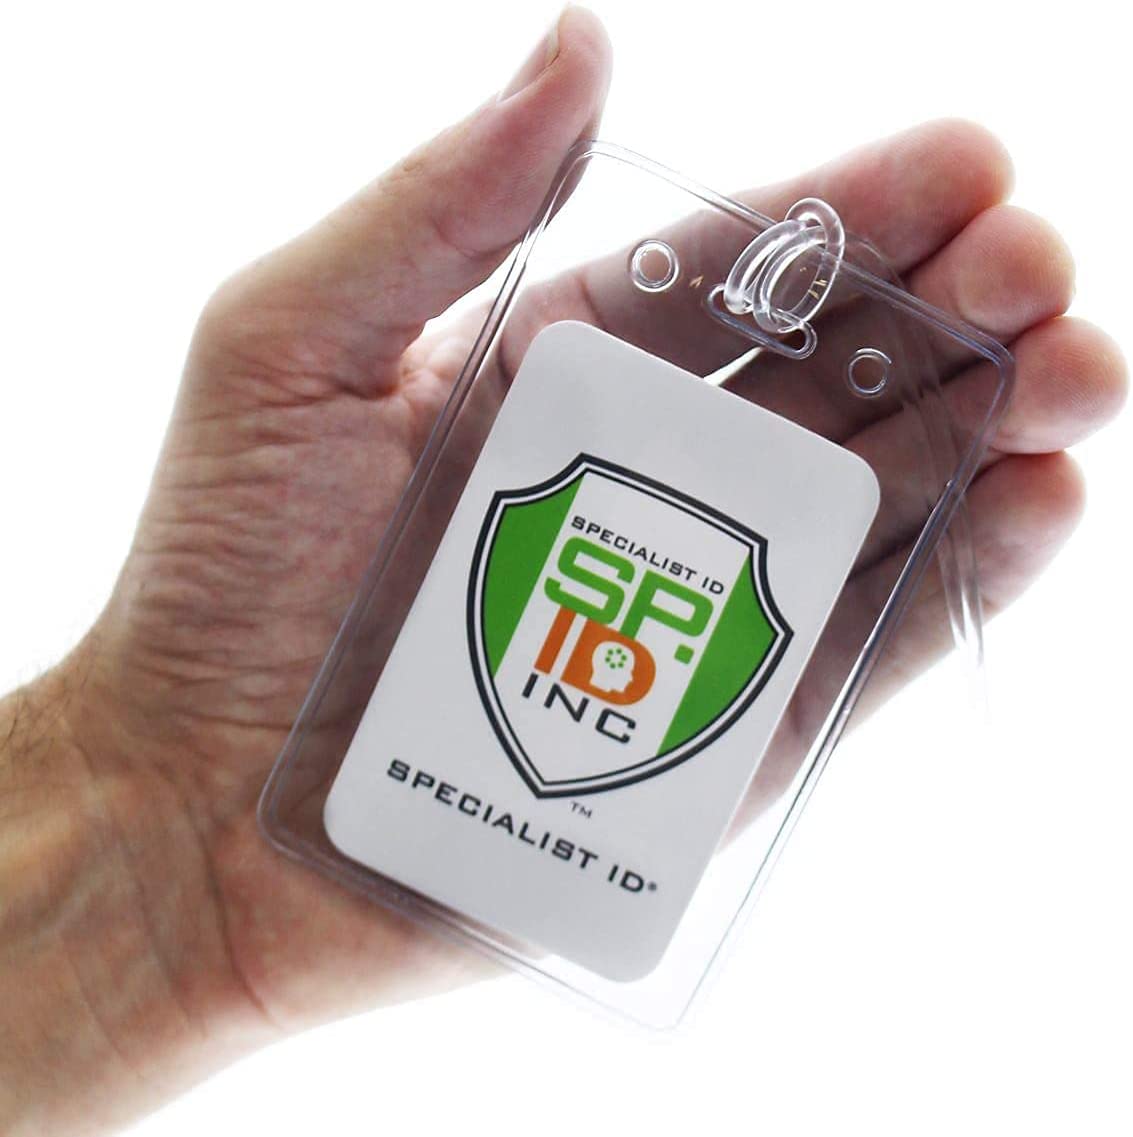 A hand holding a Clear Plastic Luggage Identification Tags with Loops Included - Business Card or Photo Insert (Locking Top) with secure loops and a card inside displaying the Specialist ID logo.